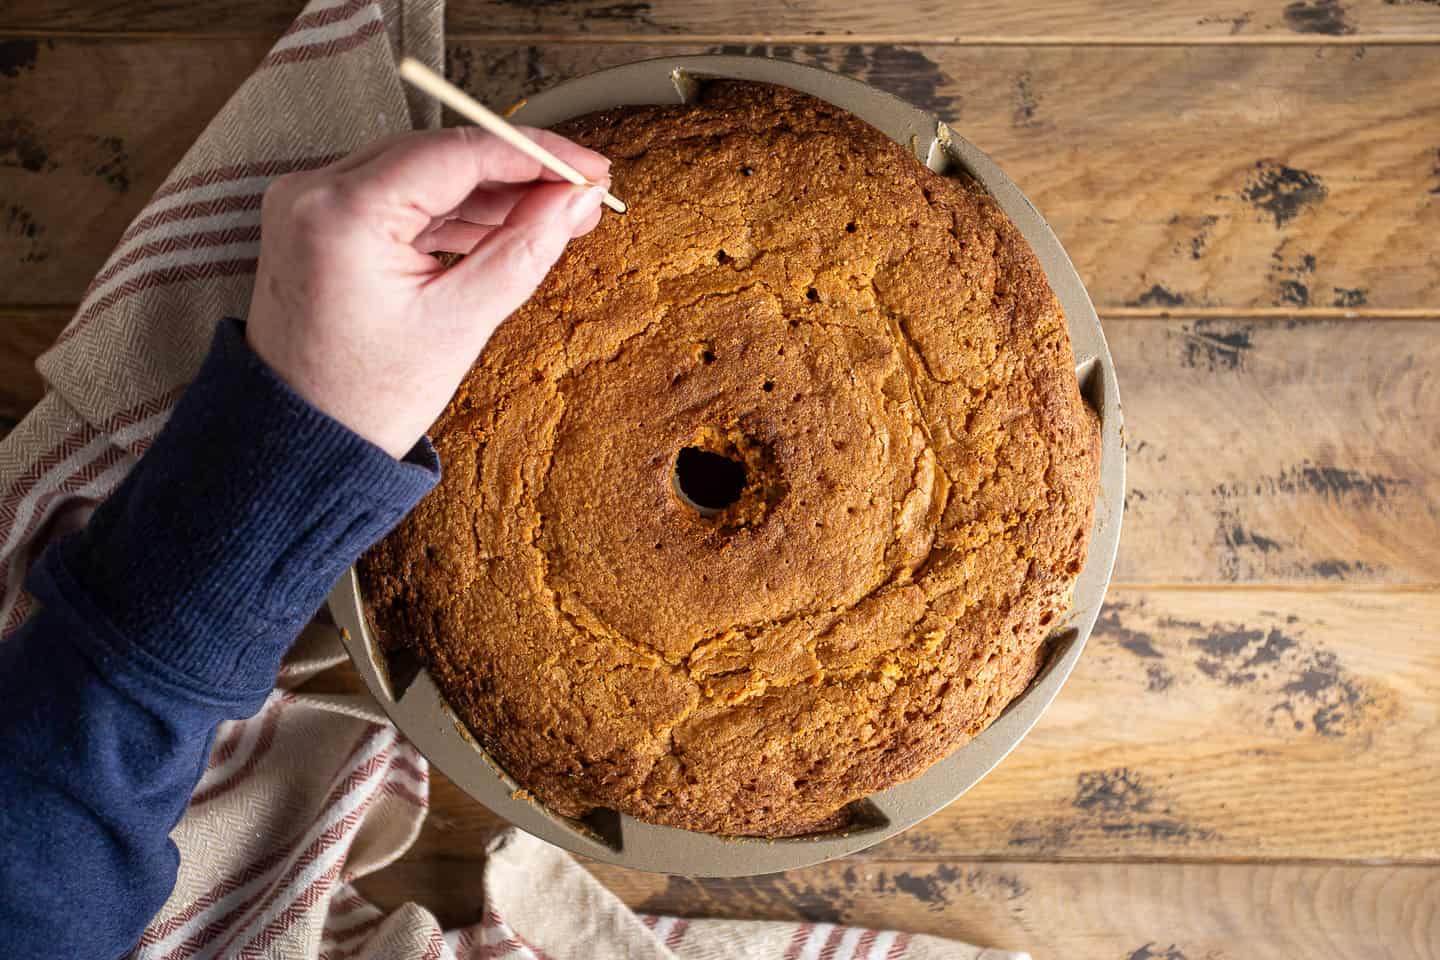 Poking holes in the bottom of a rum cake with a bamboo skewer.